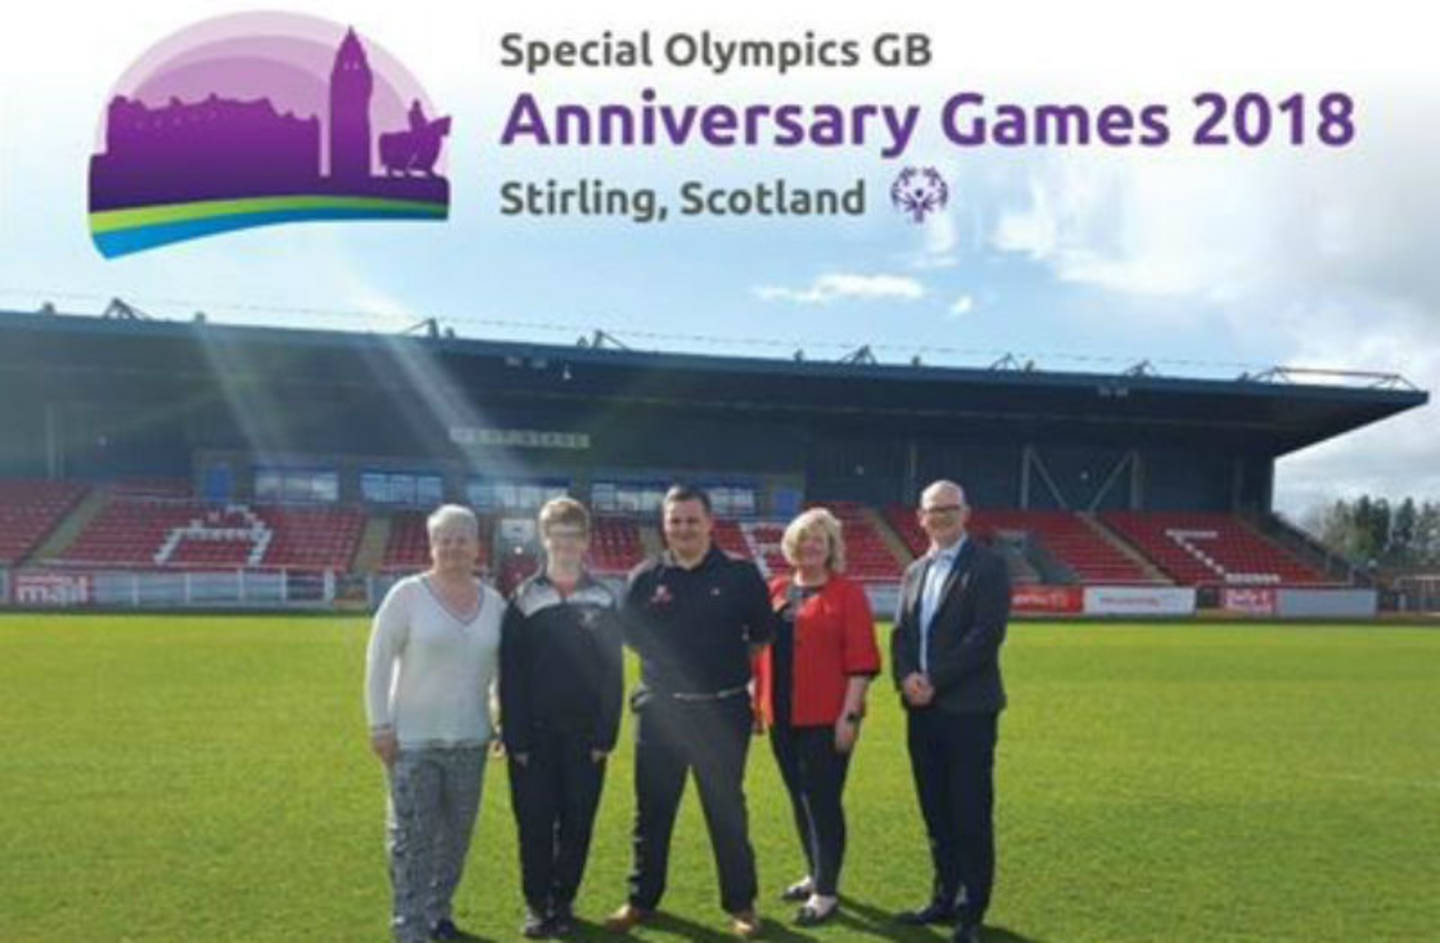 Representatives for SOGB Anniversary Games on the field